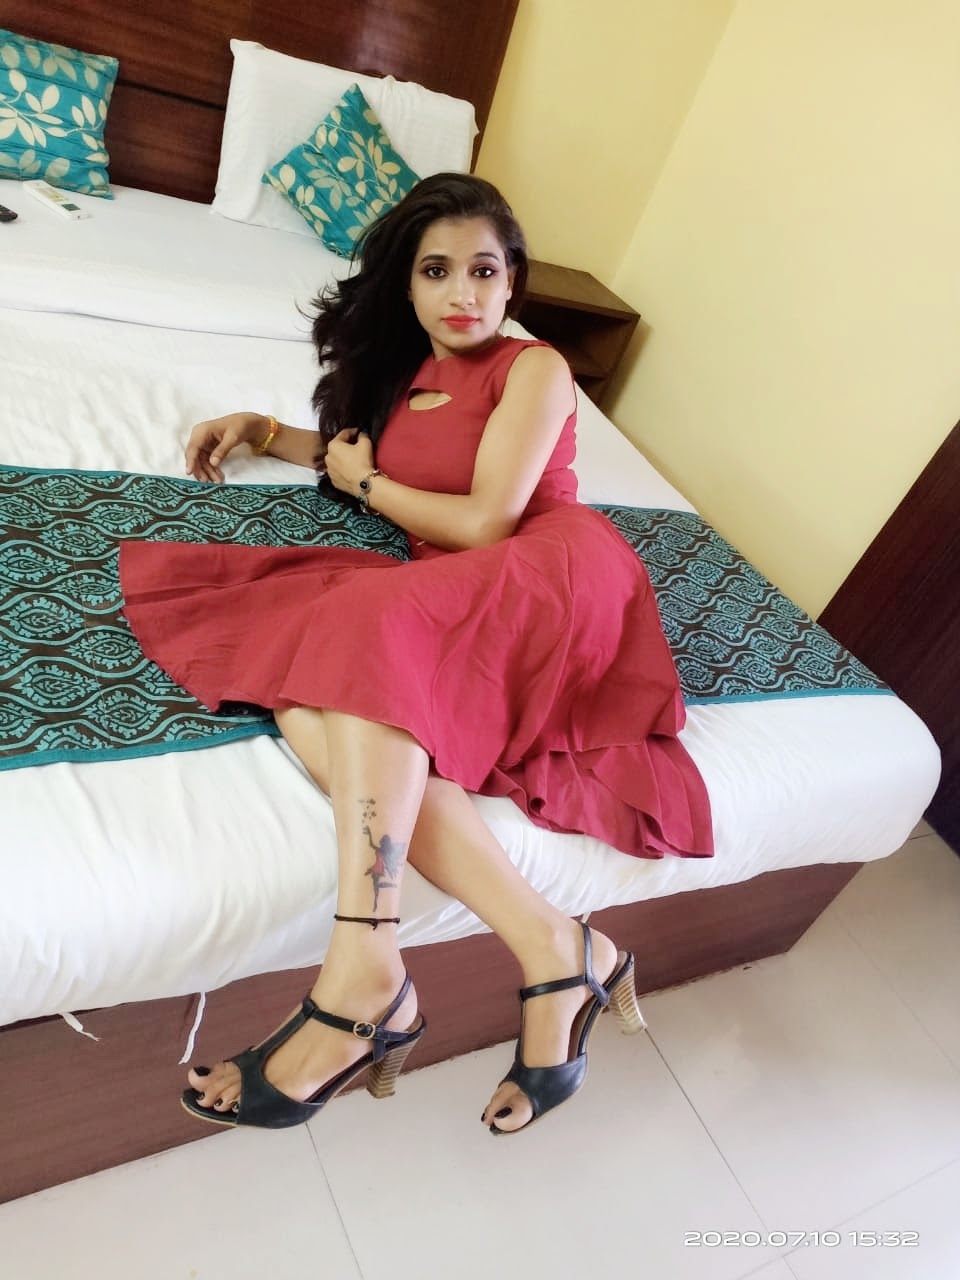 Chandigarh..AFFORDABLE AND CHEAPEST CALL GIRL SERVICE